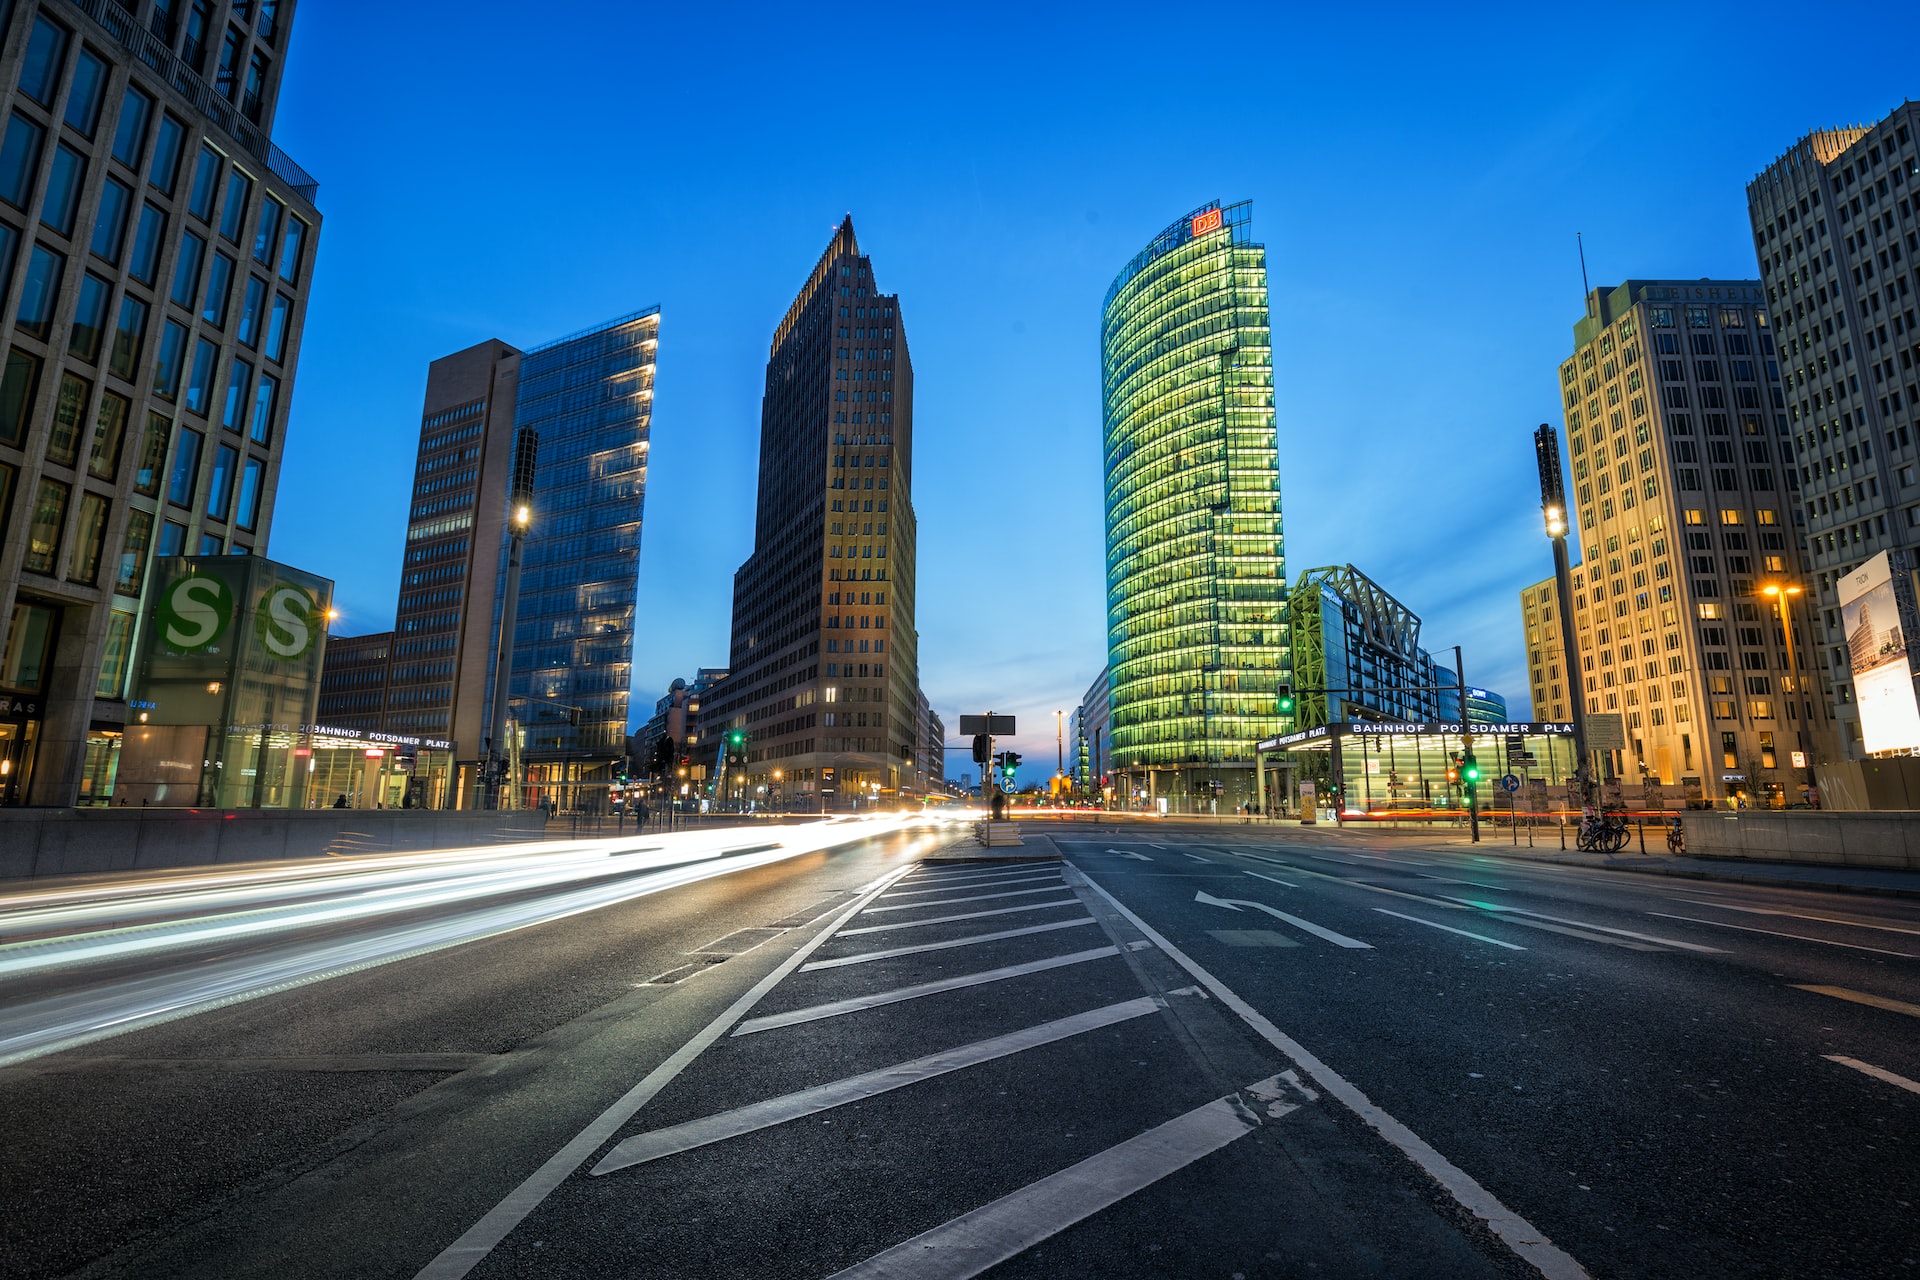 Once on the border between East and West Berlin, Potsdamer Platz has become the city's most important business hub